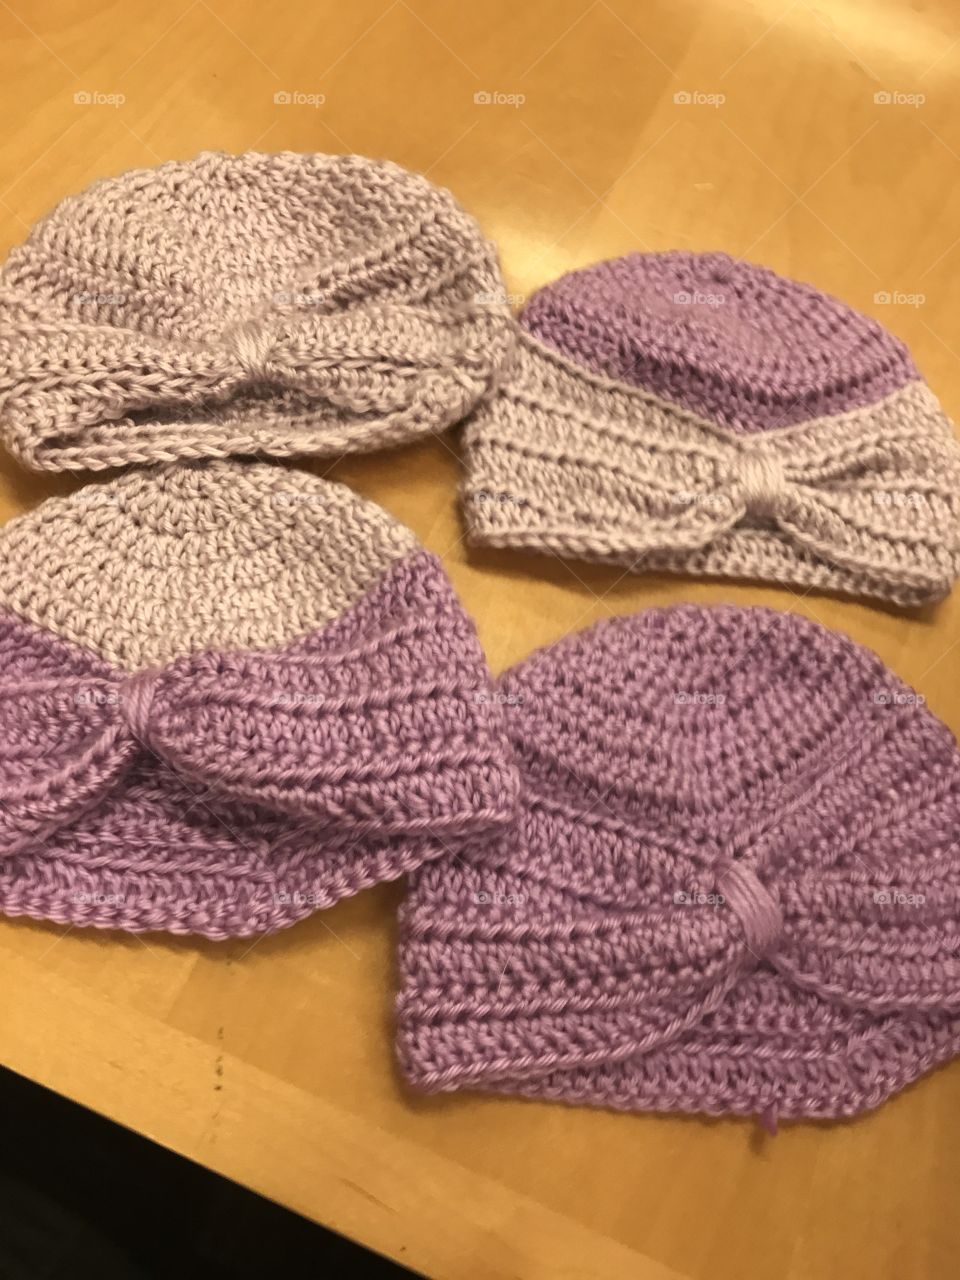 Four purple crocheted baby hats